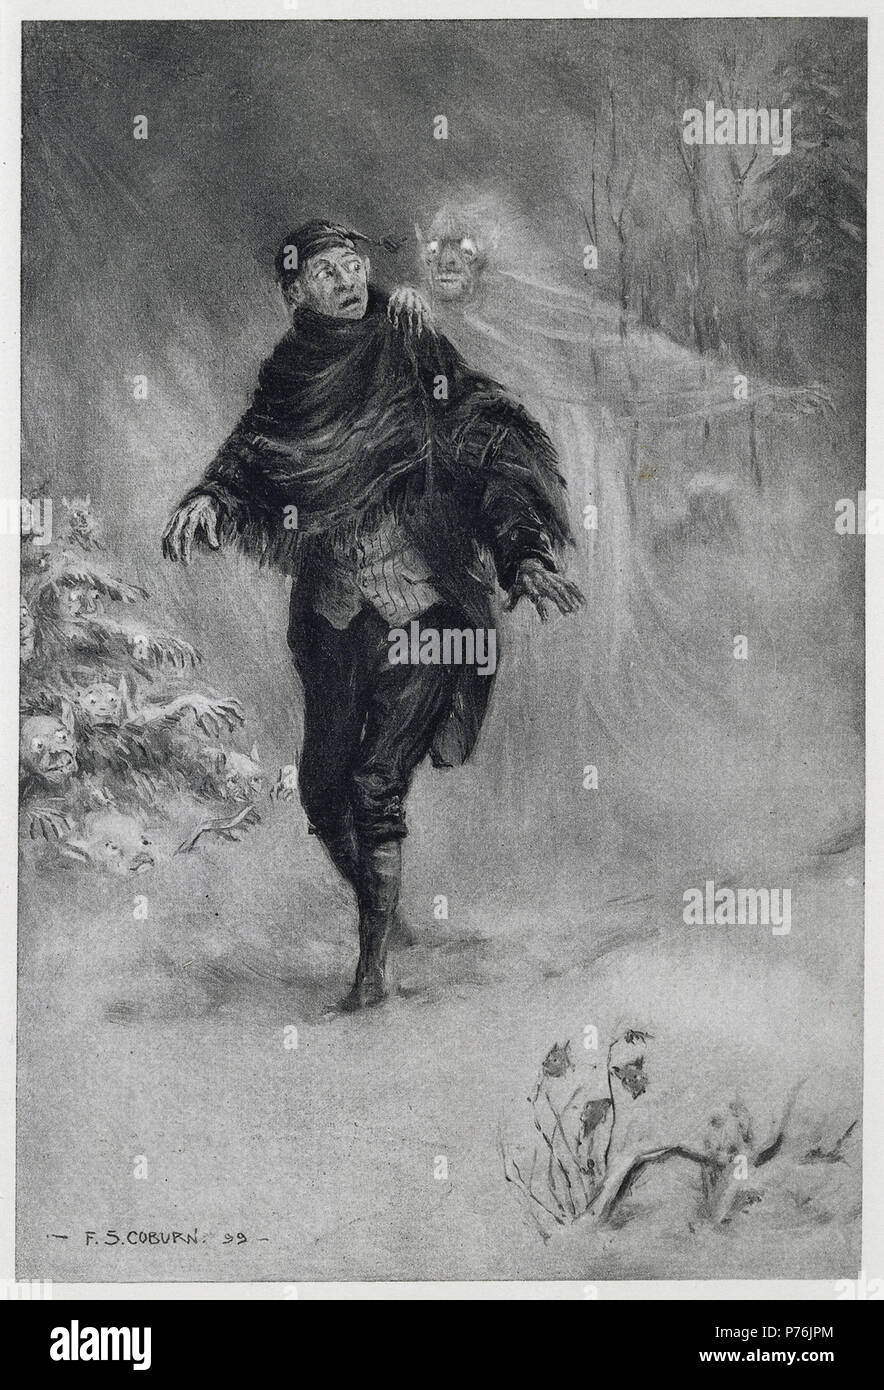 . 'What fearful shapes and shadows beset his path amidst the dim and ghastly glare of a snowy night!' .  Ichabod Crane imagining a phantom at his shoulder. American ghost story and folk tale. 1899 1 What fearful shapes and shadows beset his path - The Legend of Sleepy Hollow (1899), frontispiece - BL Stock Photo